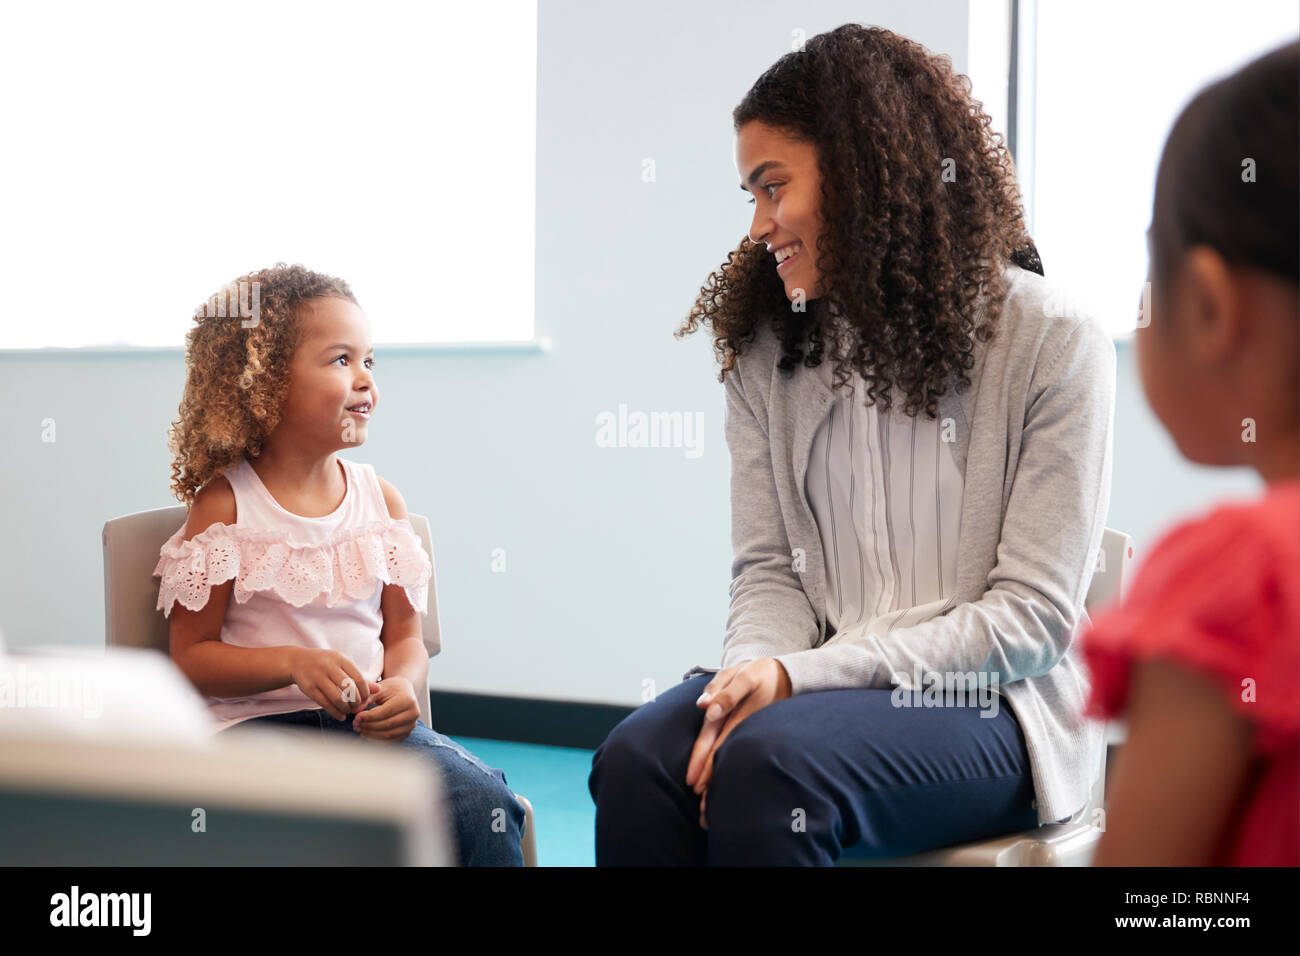 Infant school girl and her female teacher sitting on chairs in a classroom smiling to each other, close up Stock Photo